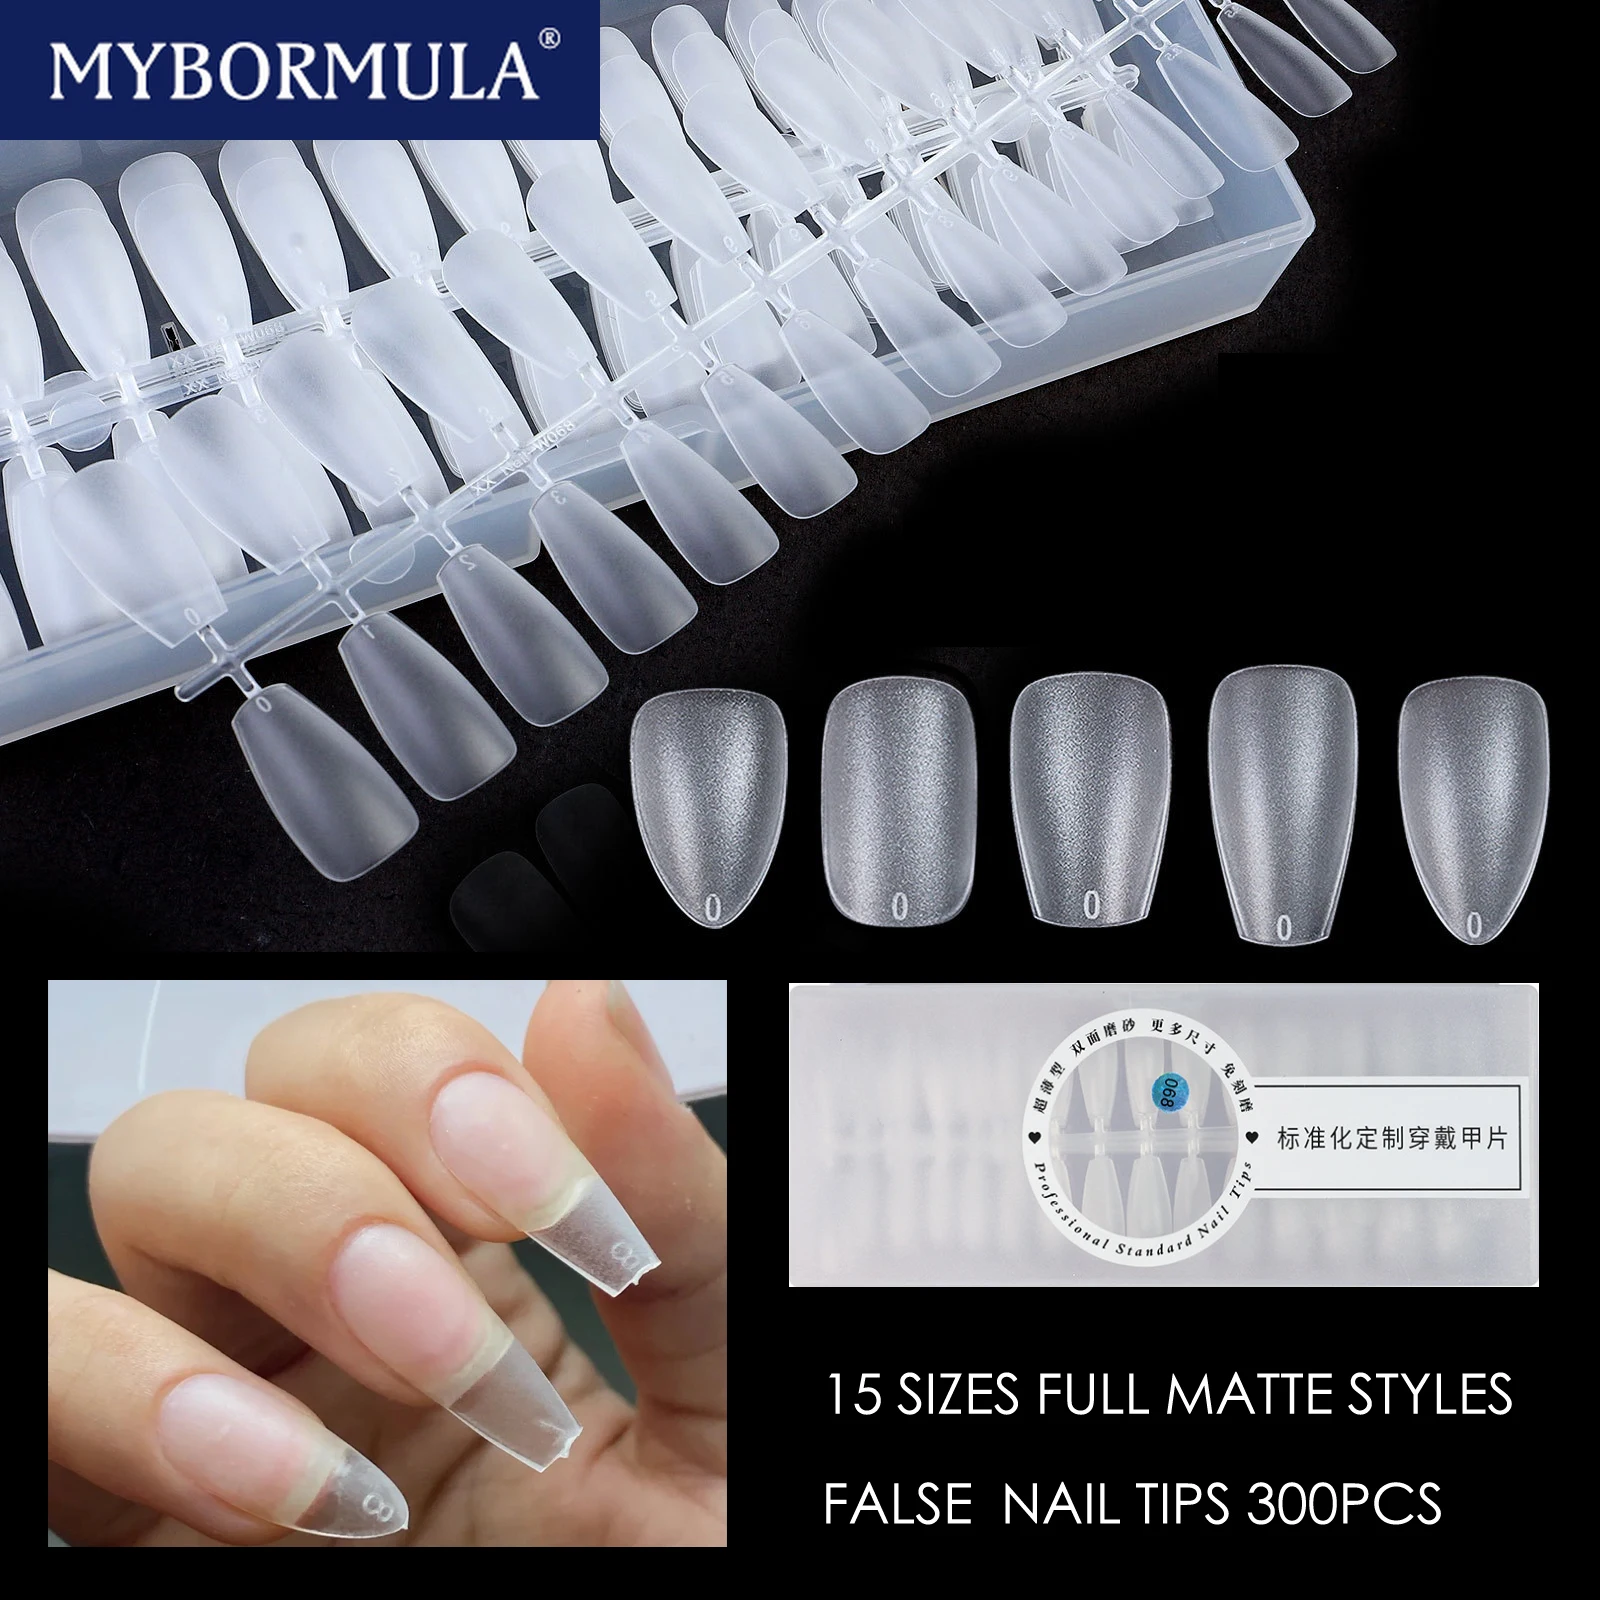 

300pcs Matte Full Cover Fake Nail Tips Coffin/stiletto Ultra Thin Frosted False Nail Extension Capsule Ongle 15 Sizes Black Tech